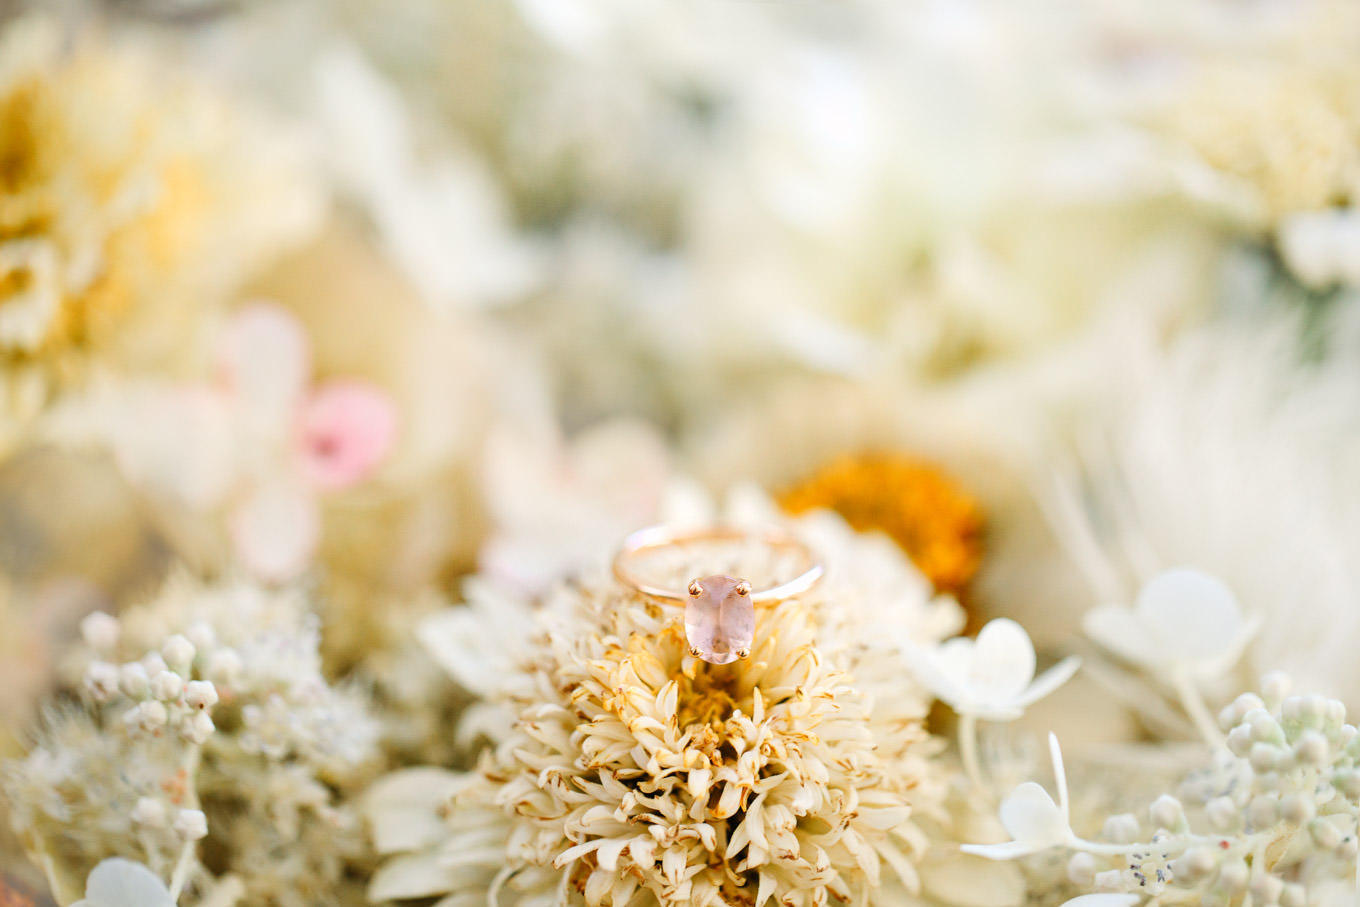 Pink diamond rose gold ring | Los Angeles Arboretum Elopement | Colorful and elevated wedding photography for fun-loving couples in Southern California | #LosAngelesElopement #elopement #LAarboretum #LAskyline #elopementphotos   Source: Mary Costa Photography | Los Angeles